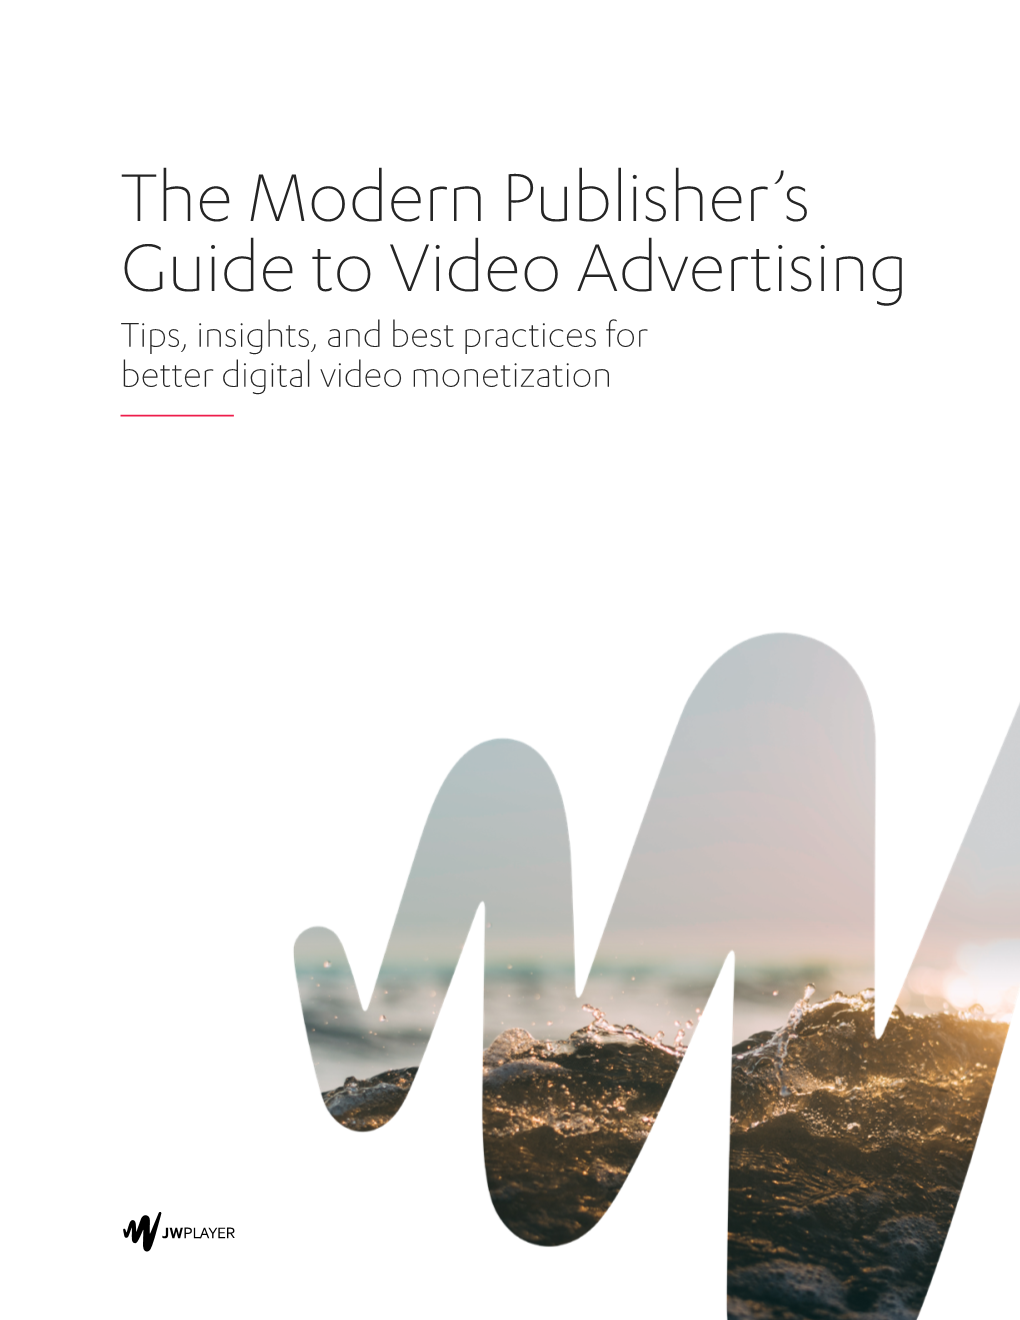 The Modern Publisher's Guide to Video Advertising